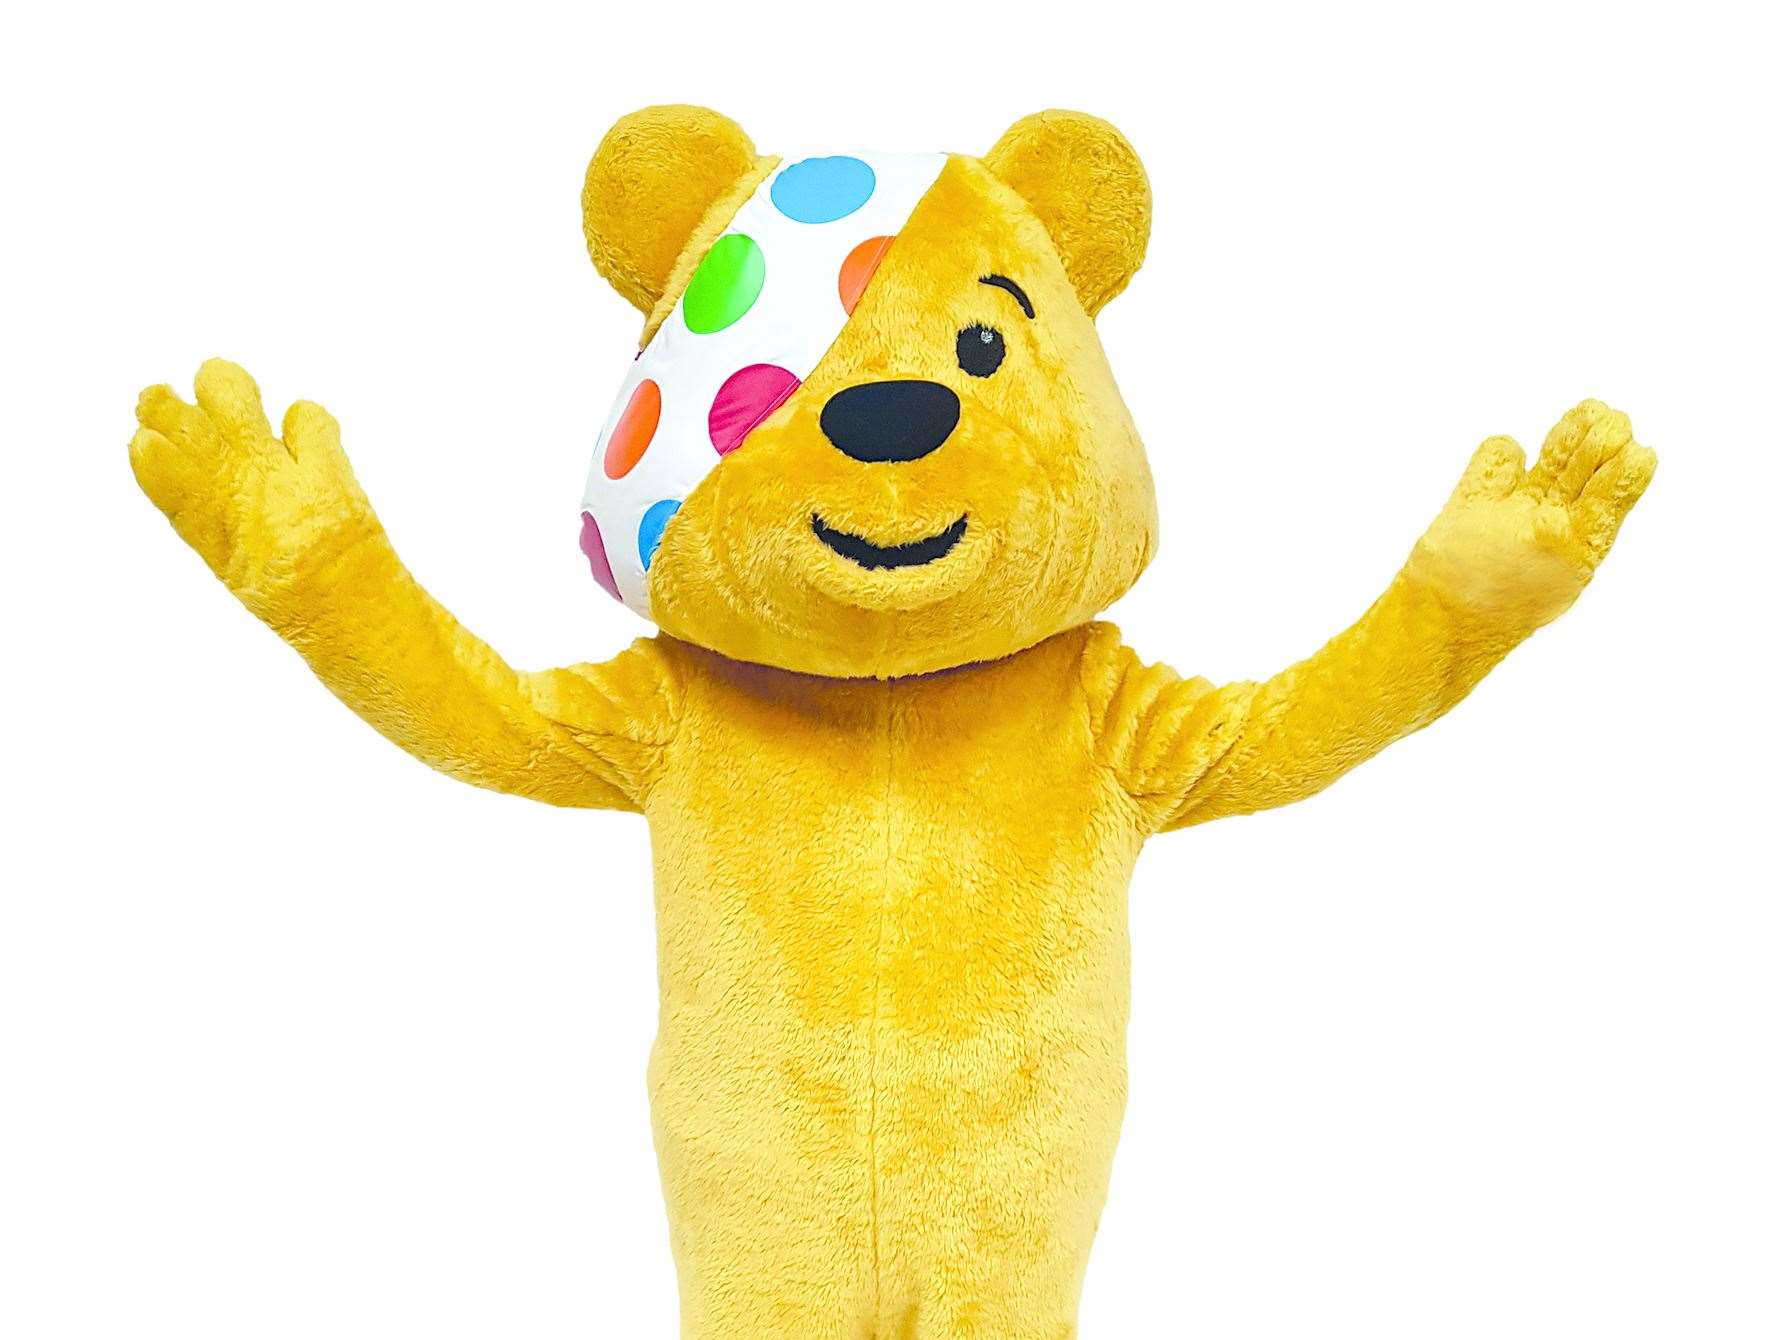 Children in Kent will take part in a nation wide live performance for Children in Need (20951544)